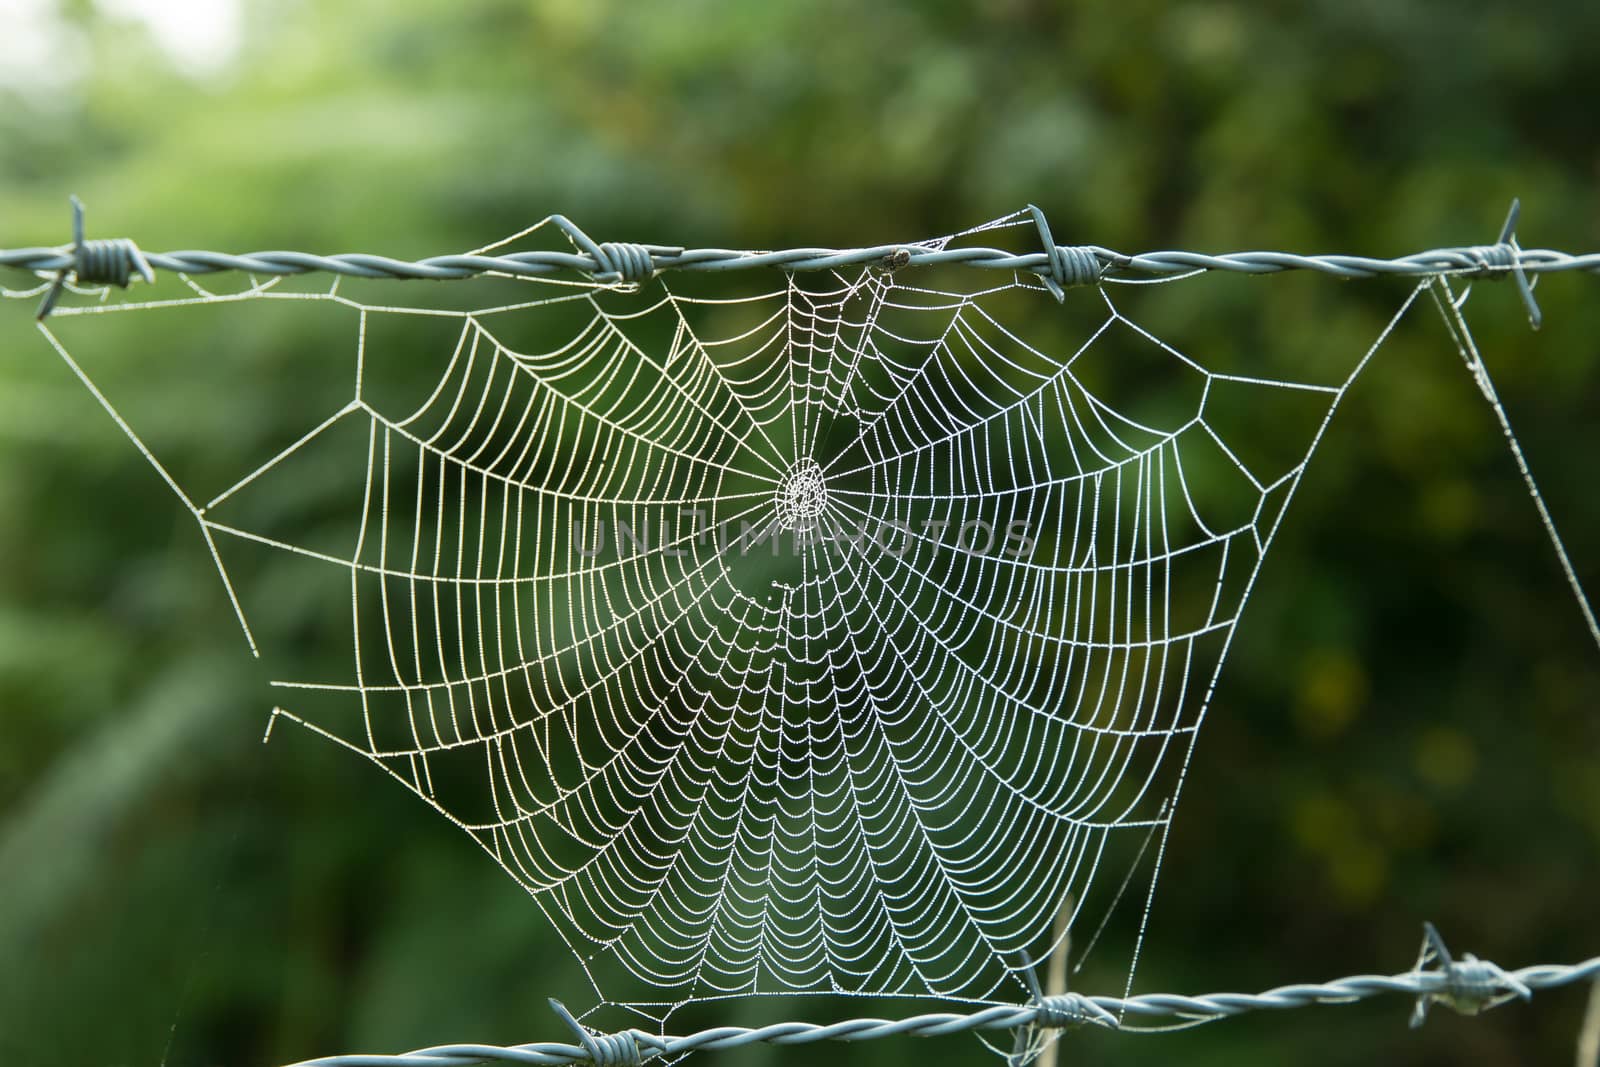 Spider cobweb suspended between rows of barbed wire, with early morning dew.